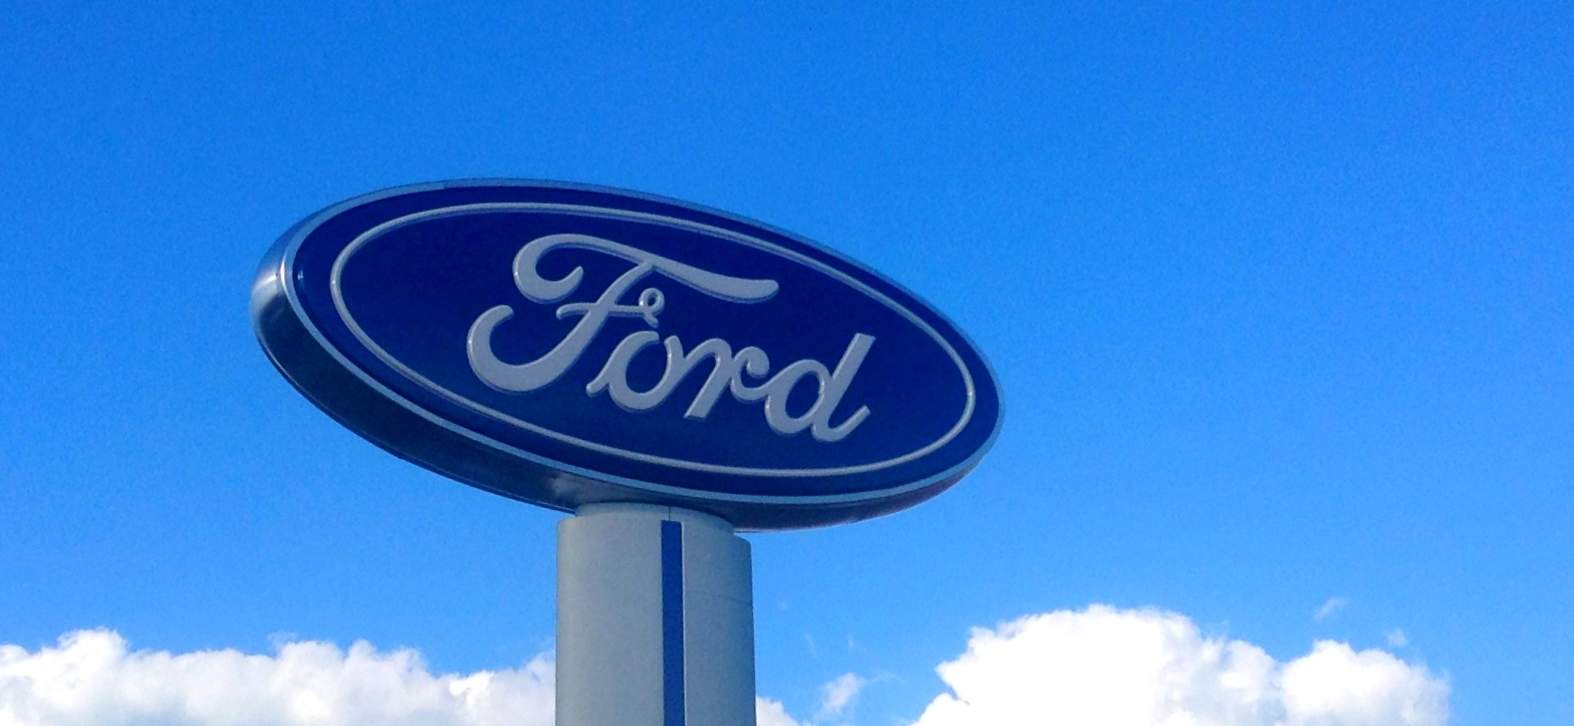 Ford is ready for the future of self-driving cars.